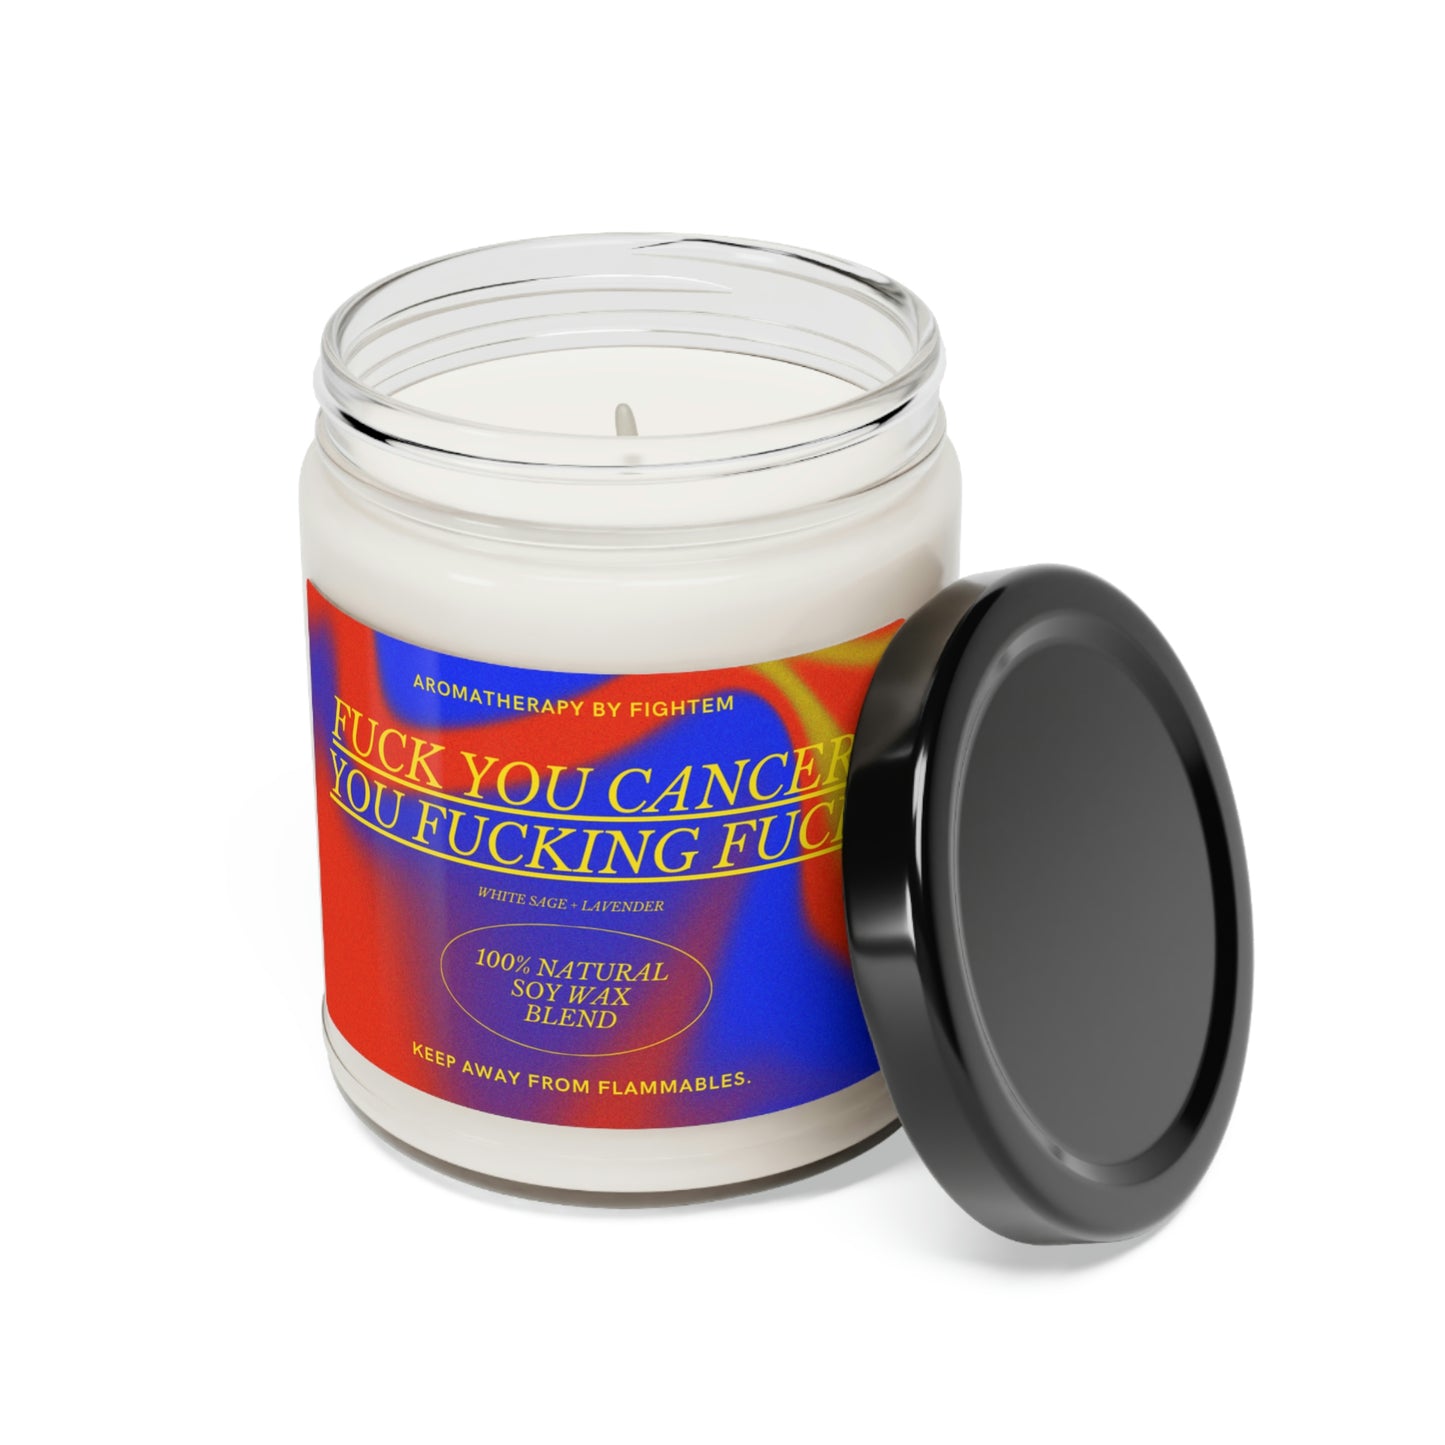 F*ck You Cancer Bold Gradient Scented Soy Candle